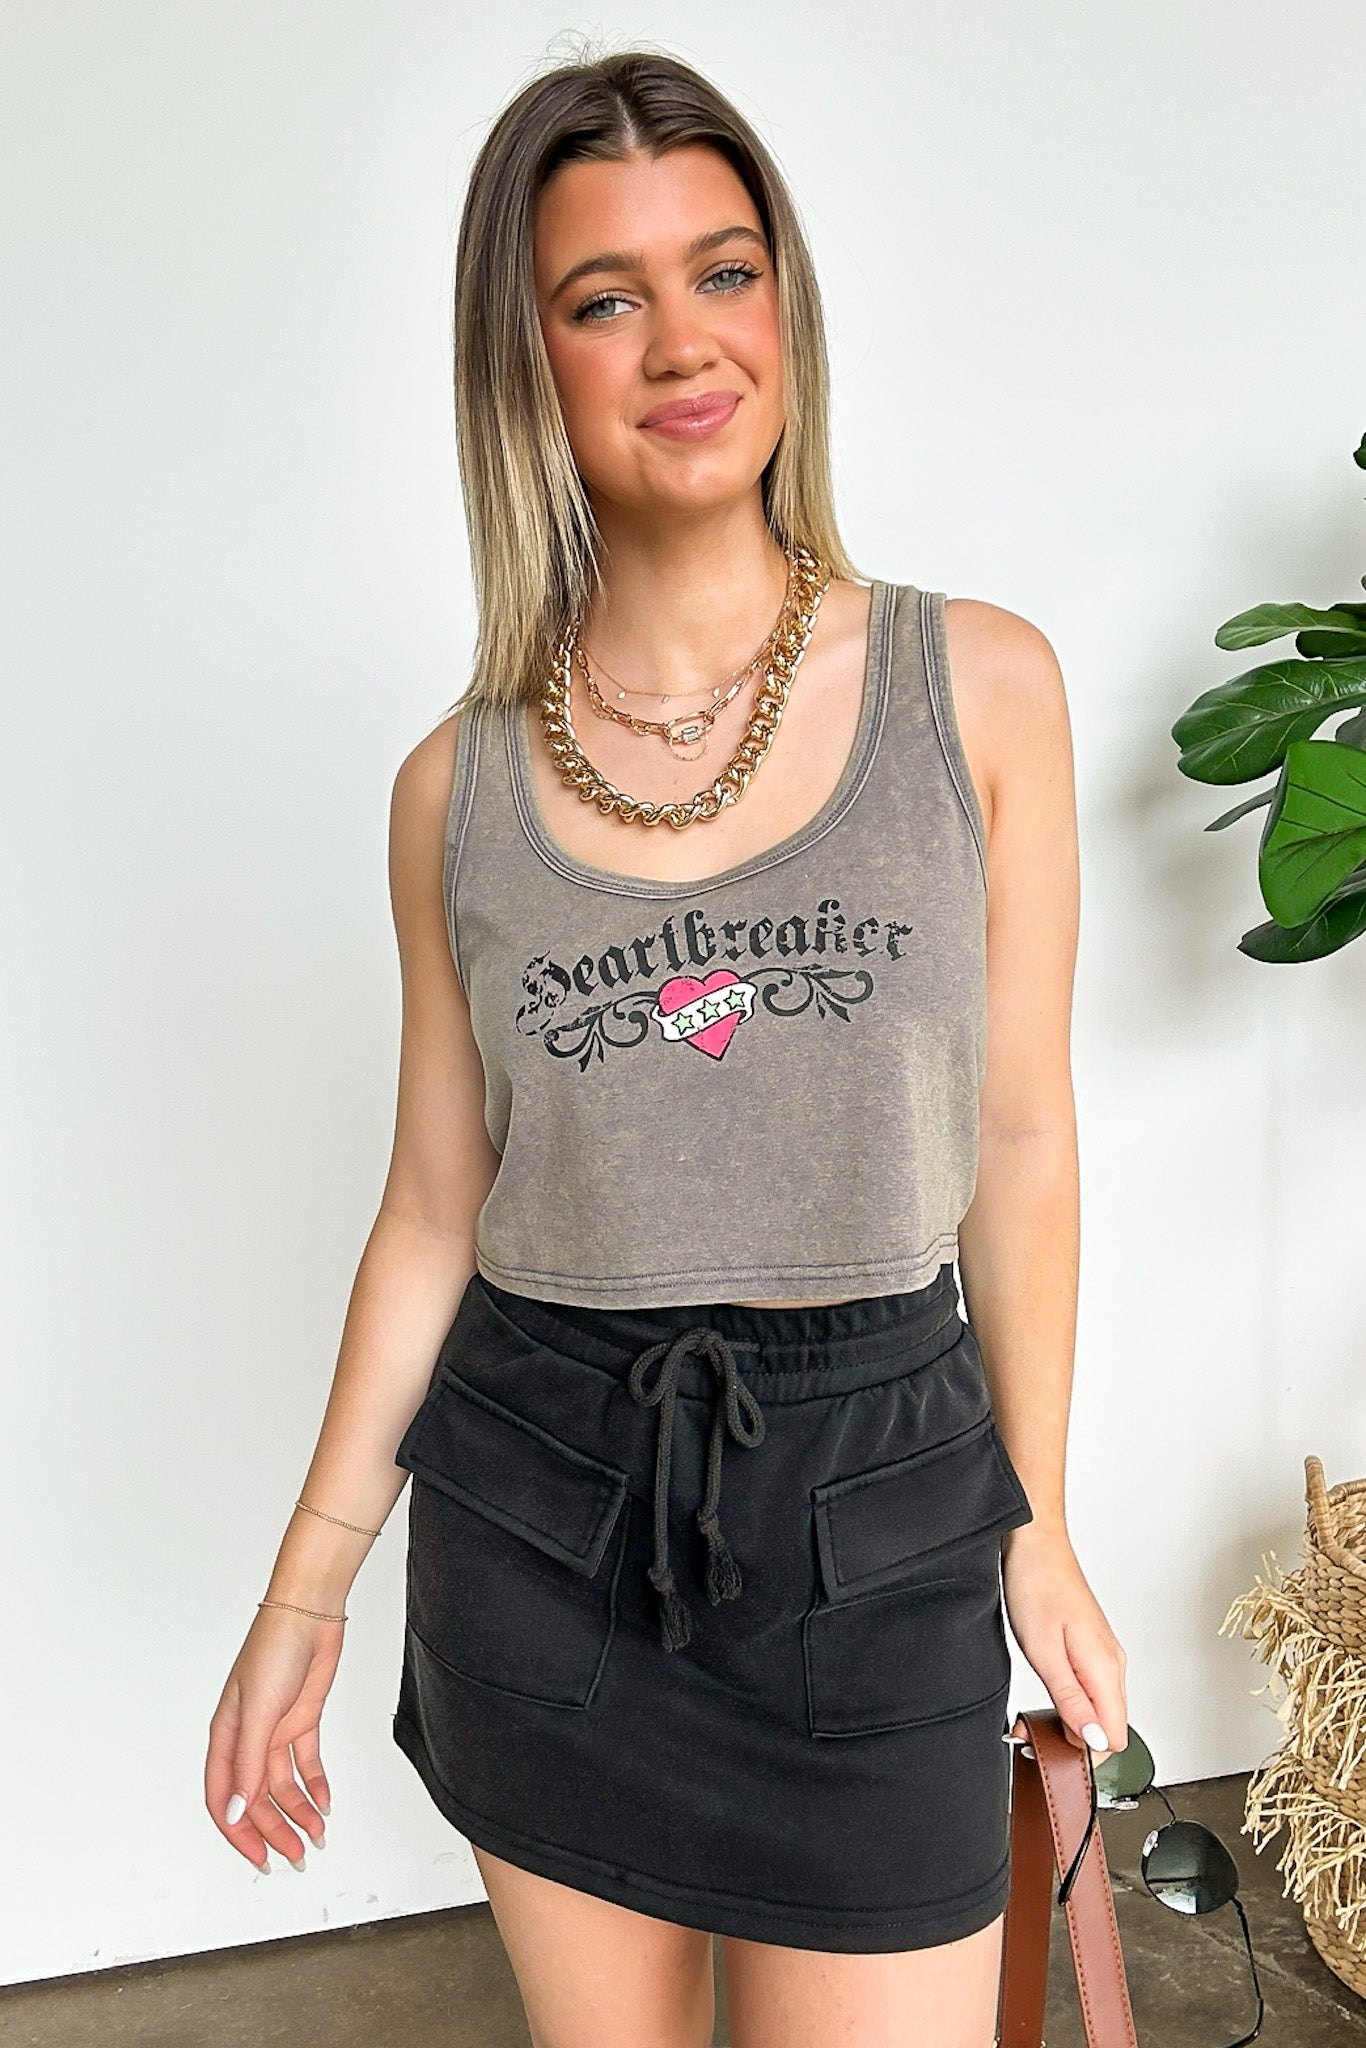  Heartbreaker Vintage Graphic Tank Top - Madison and Mallory